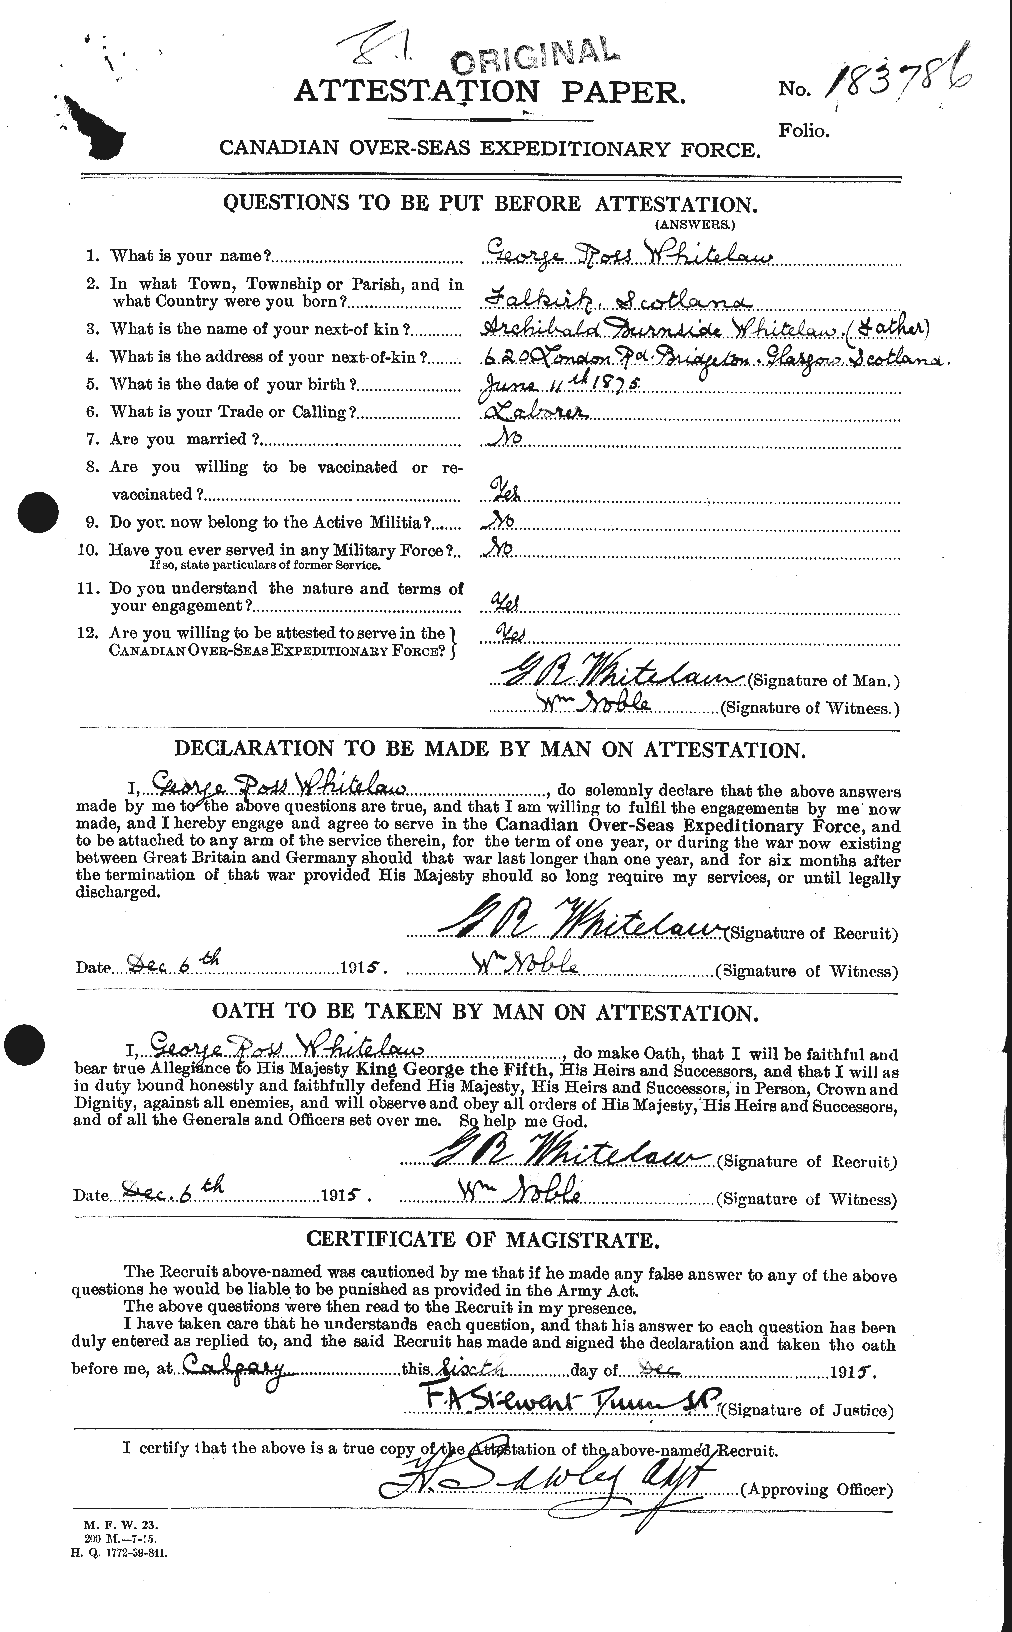 Personnel Records of the First World War - CEF 671118a